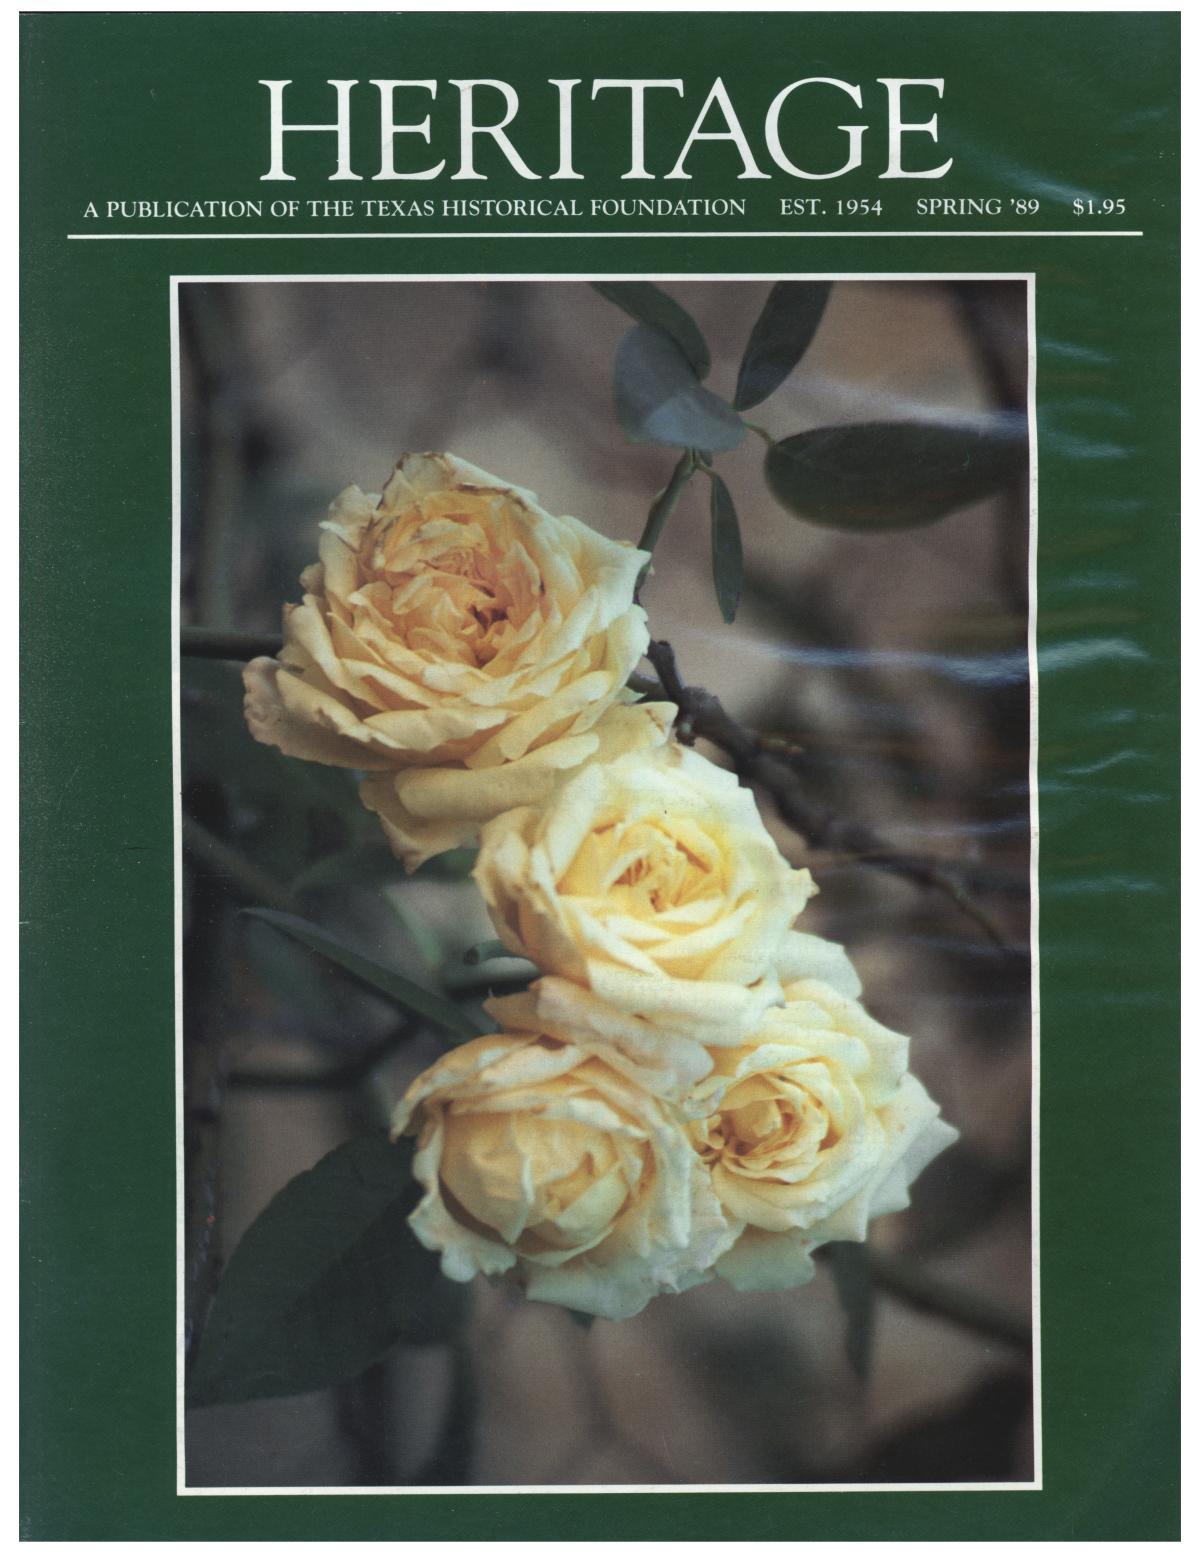 Heritage, Volume 7, Number 2, Spring 1989
                                                
                                                    Front Cover
                                                